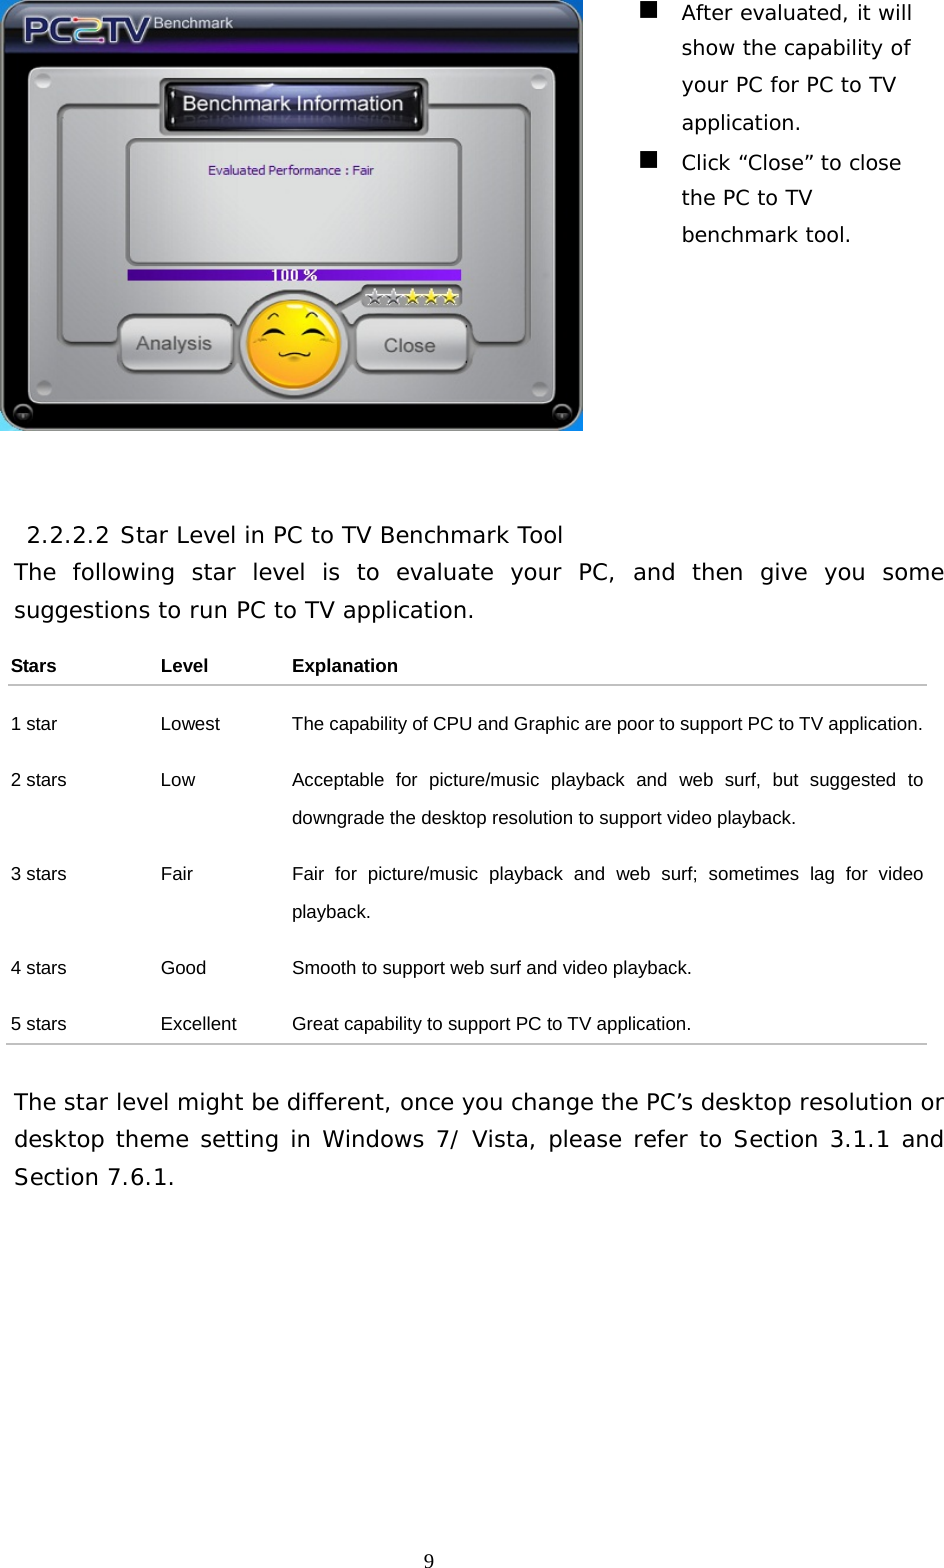   9   After evaluated, it will show the capability of your PC for PC to TV application.  Click “Close” to close the PC to TV benchmark tool.  2.2.2.2 Star Level in PC to TV Benchmark Tool The following star level is to evaluate your PC, and then give you some suggestions to run PC to TV application. Stars Level Explanation 1 star  Lowest  The capability of CPU and Graphic are poor to support PC to TV application.2 stars  Low  Acceptable for picture/music playback and web surf, but suggested to downgrade the desktop resolution to support video playback. 3 stars  Fair  Fair for picture/music playback and web surf; sometimes lag for video playback. 4 stars  Good  Smooth to support web surf and video playback. 5 stars  Excellent  Great capability to support PC to TV application.  The star level might be different, once you change the PC’s desktop resolution or desktop theme setting in Windows 7/ Vista, please refer to Section 3.1.1 and Section 7.6.1.  